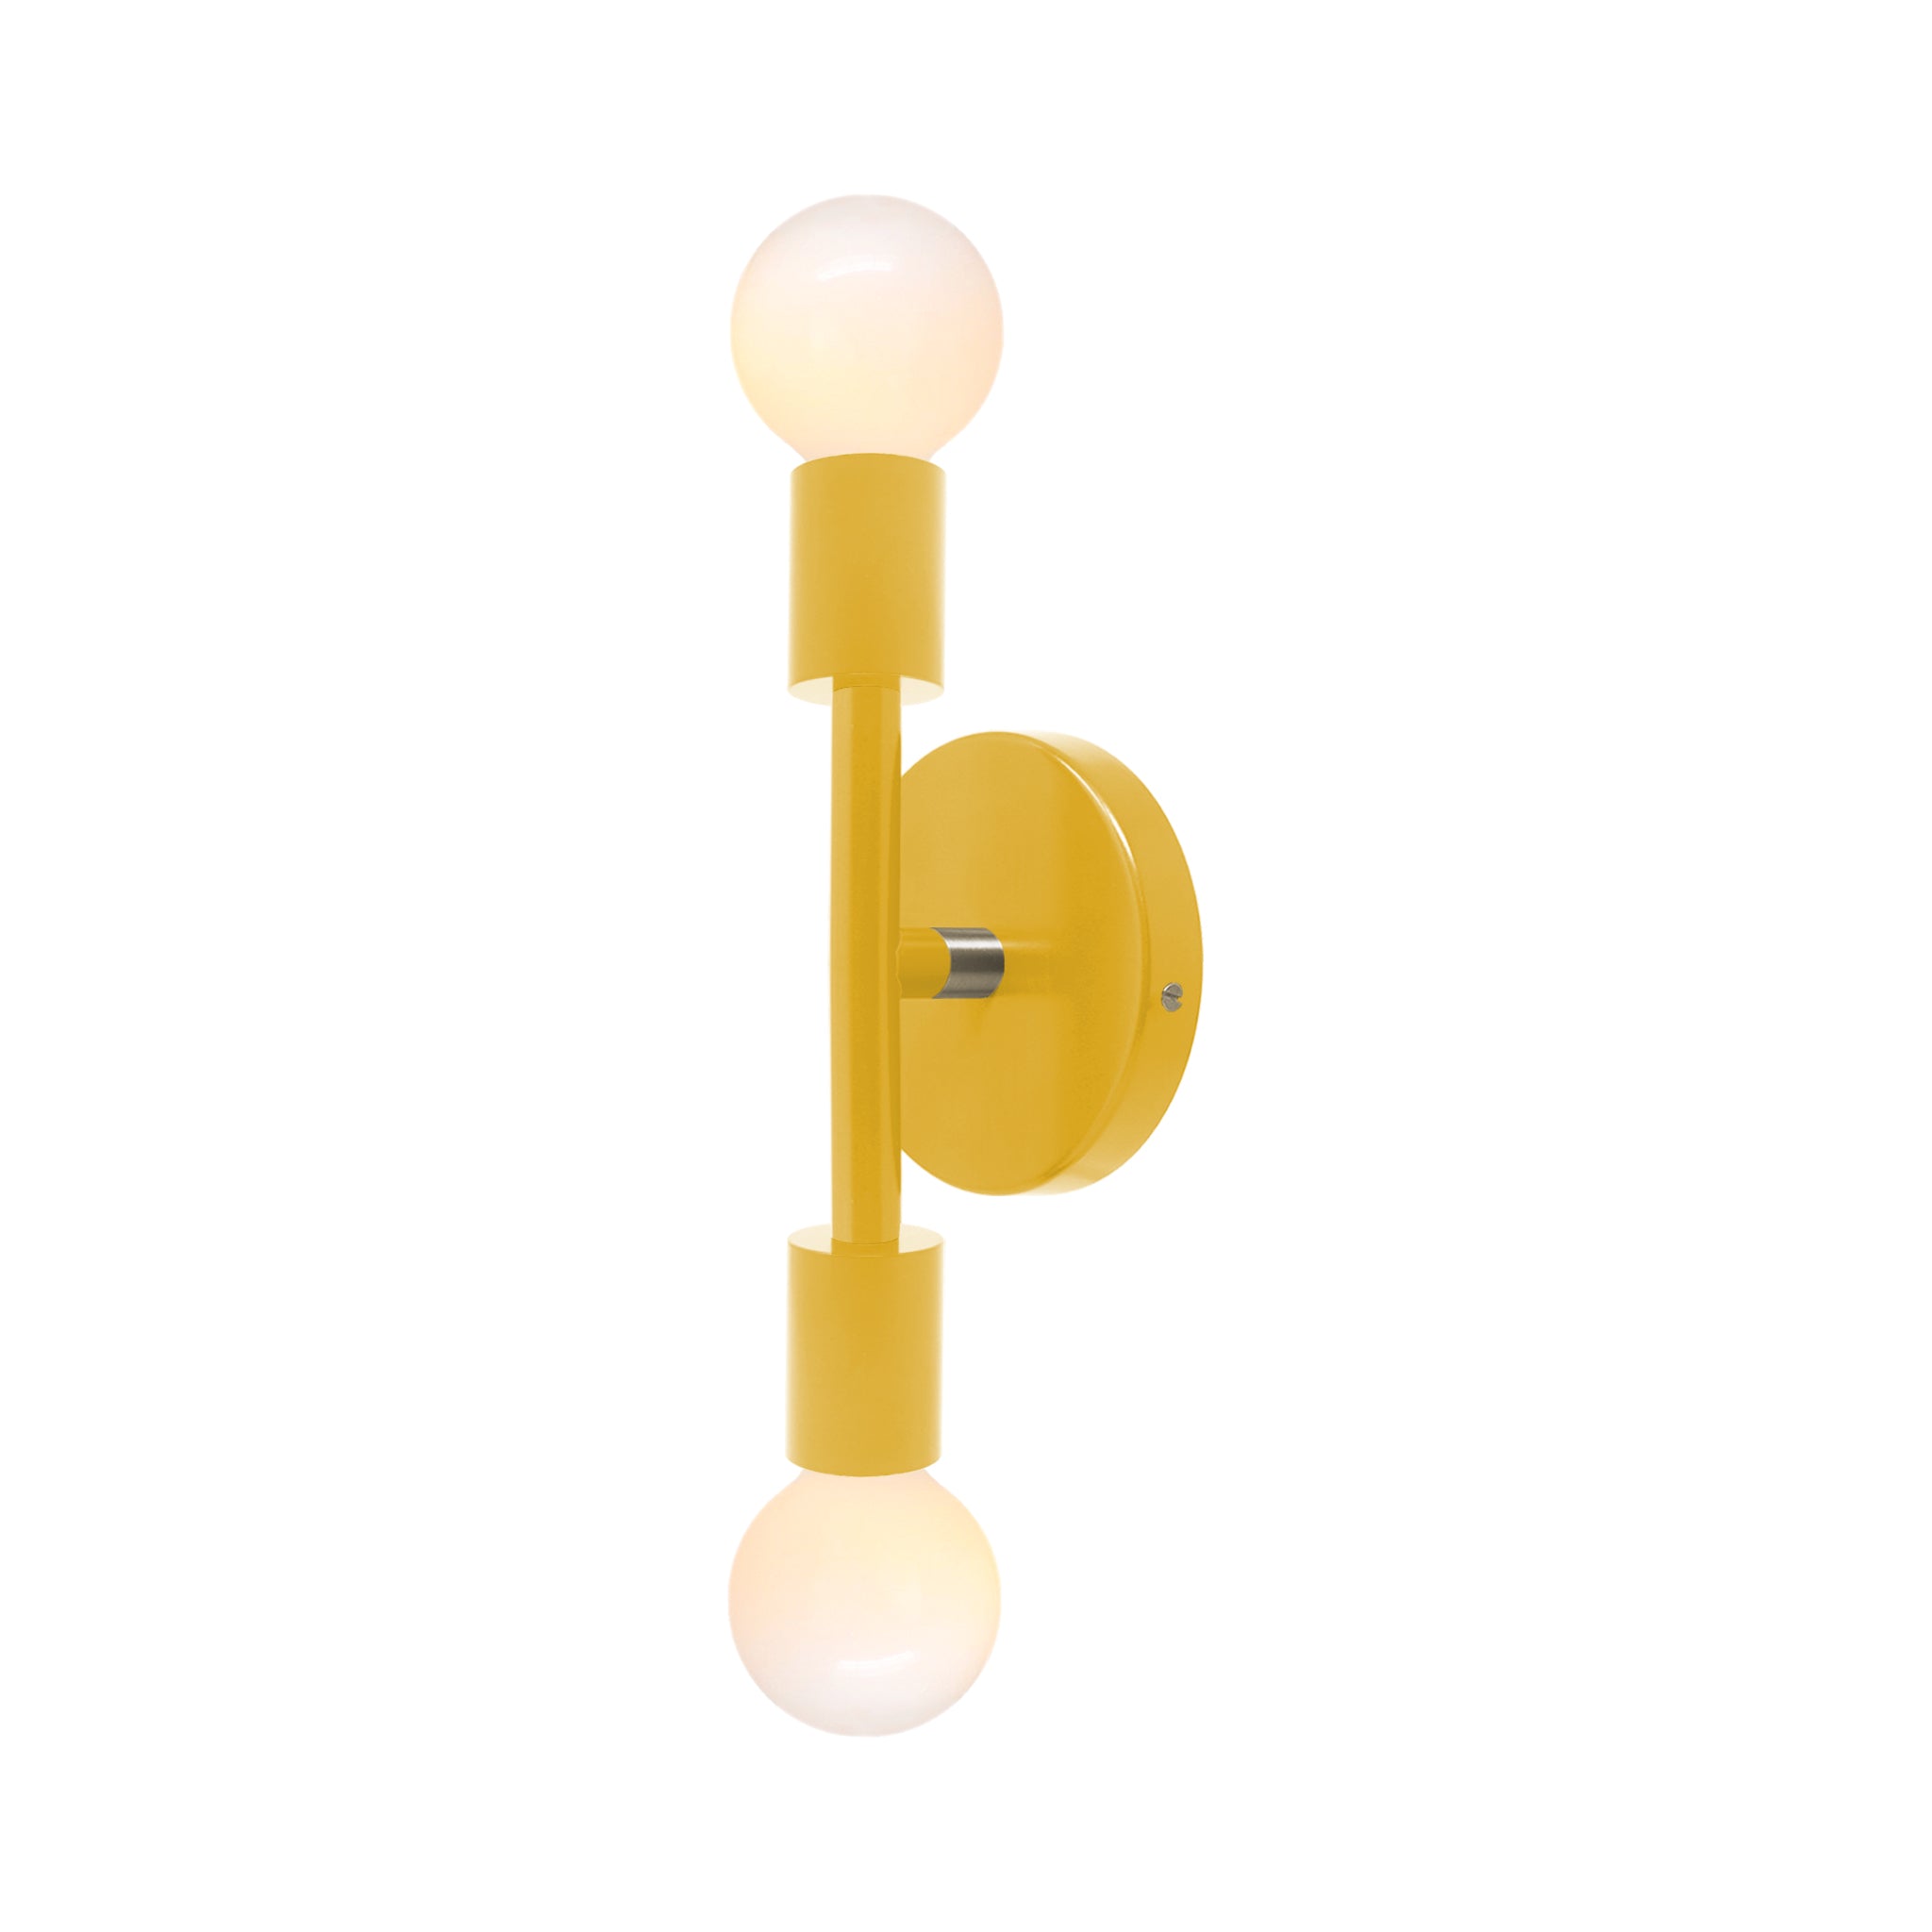 Nickel and ochre color Pilot sconce 11" Dutton Brown lighting